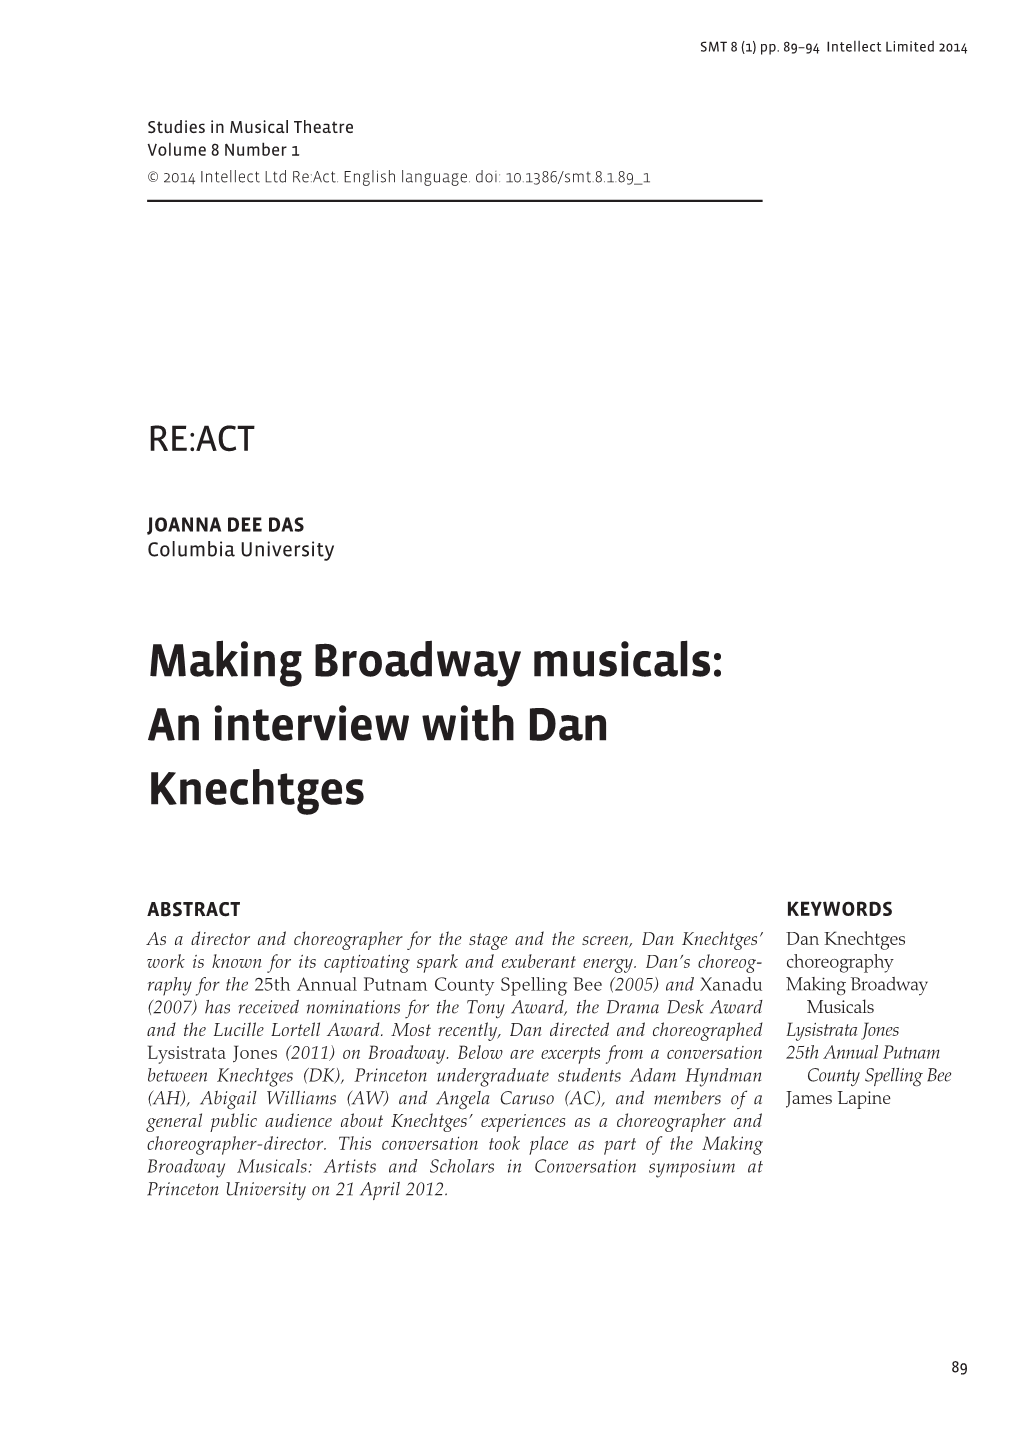 An Interview with Dan Knechtges